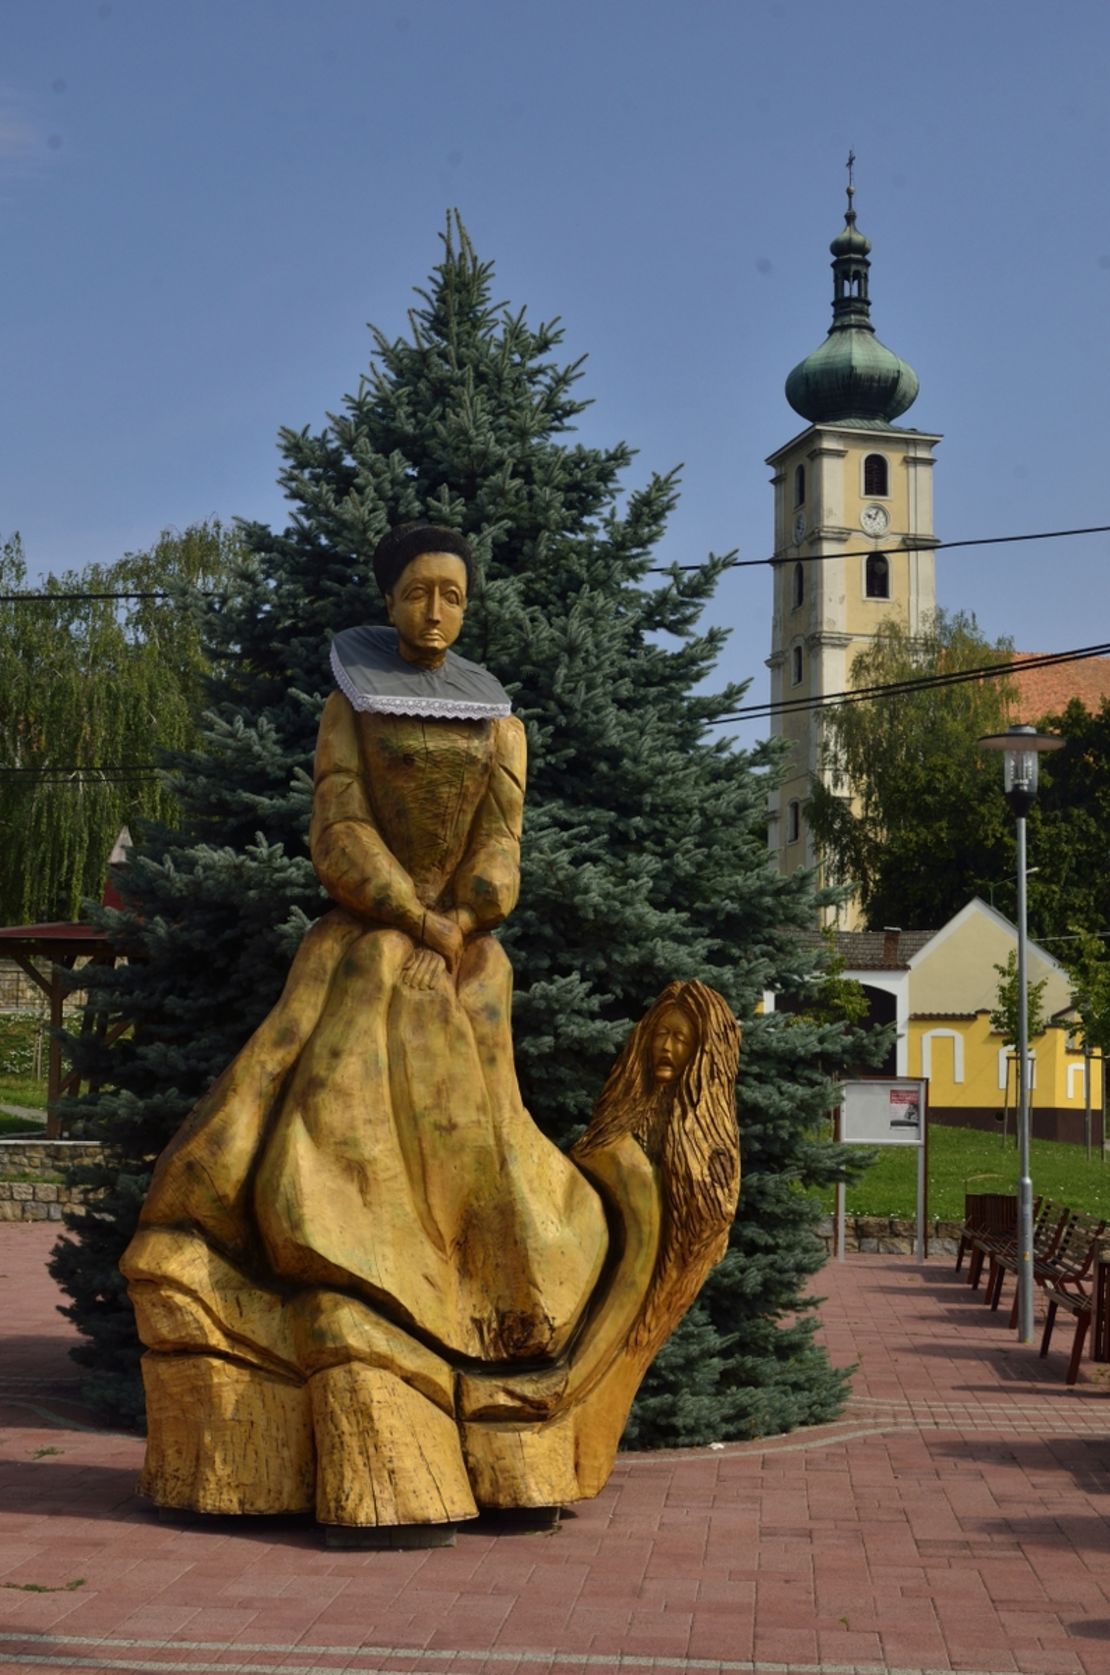 This is one statue most people would avoid in a town square.